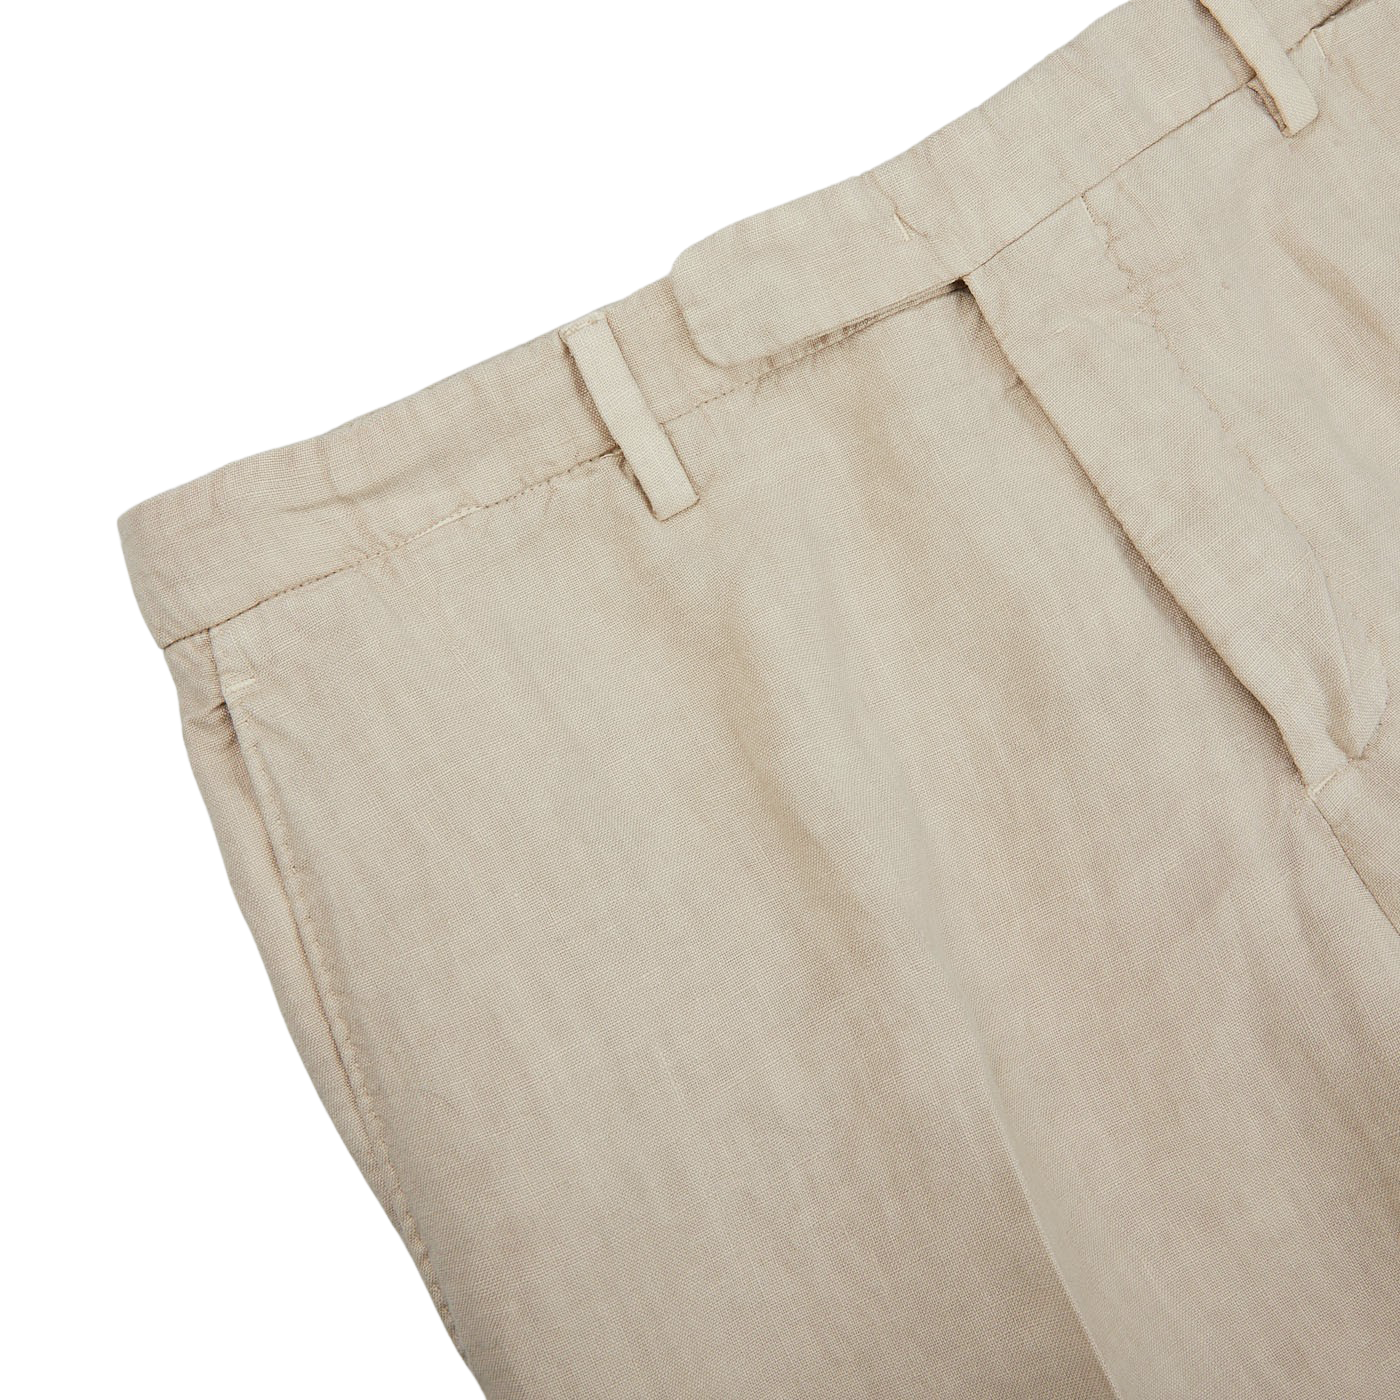 A close up of the Boglioli Sand Beige Washed Linen Unstructured Suit, made with linen fabric.